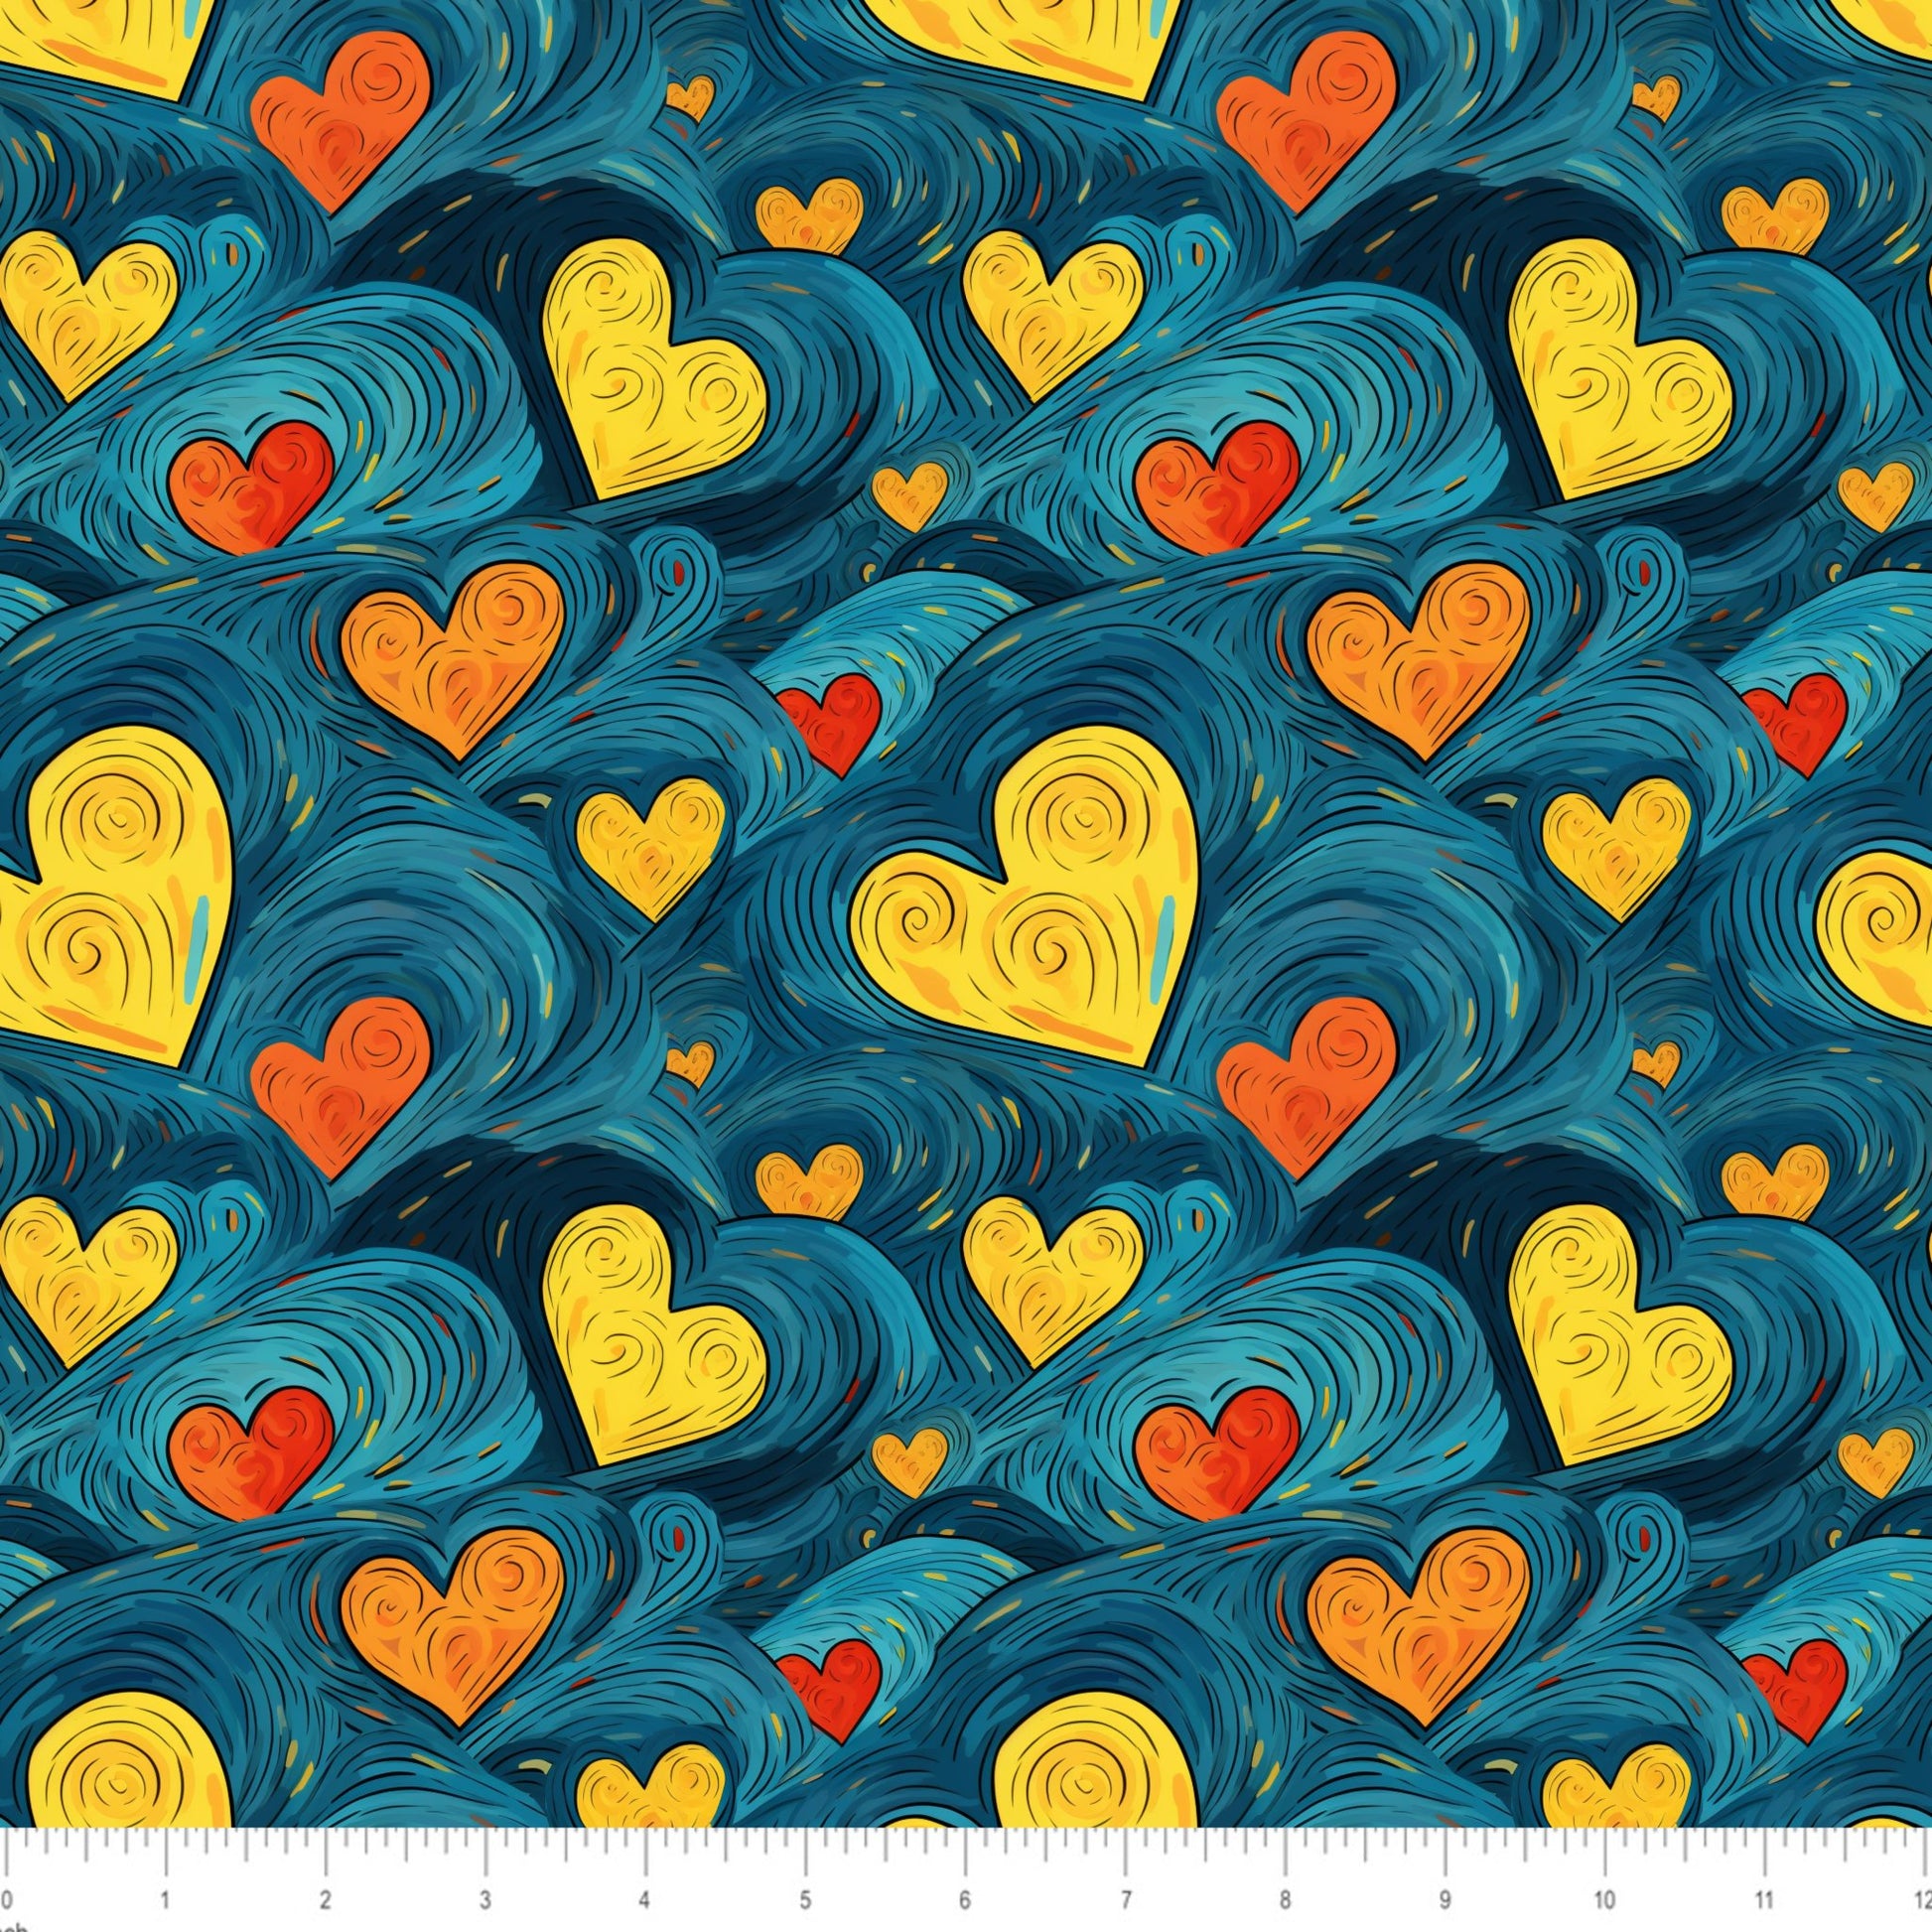 Van Gogh Inspired - Hearts - Little Rhody Sewing Co.